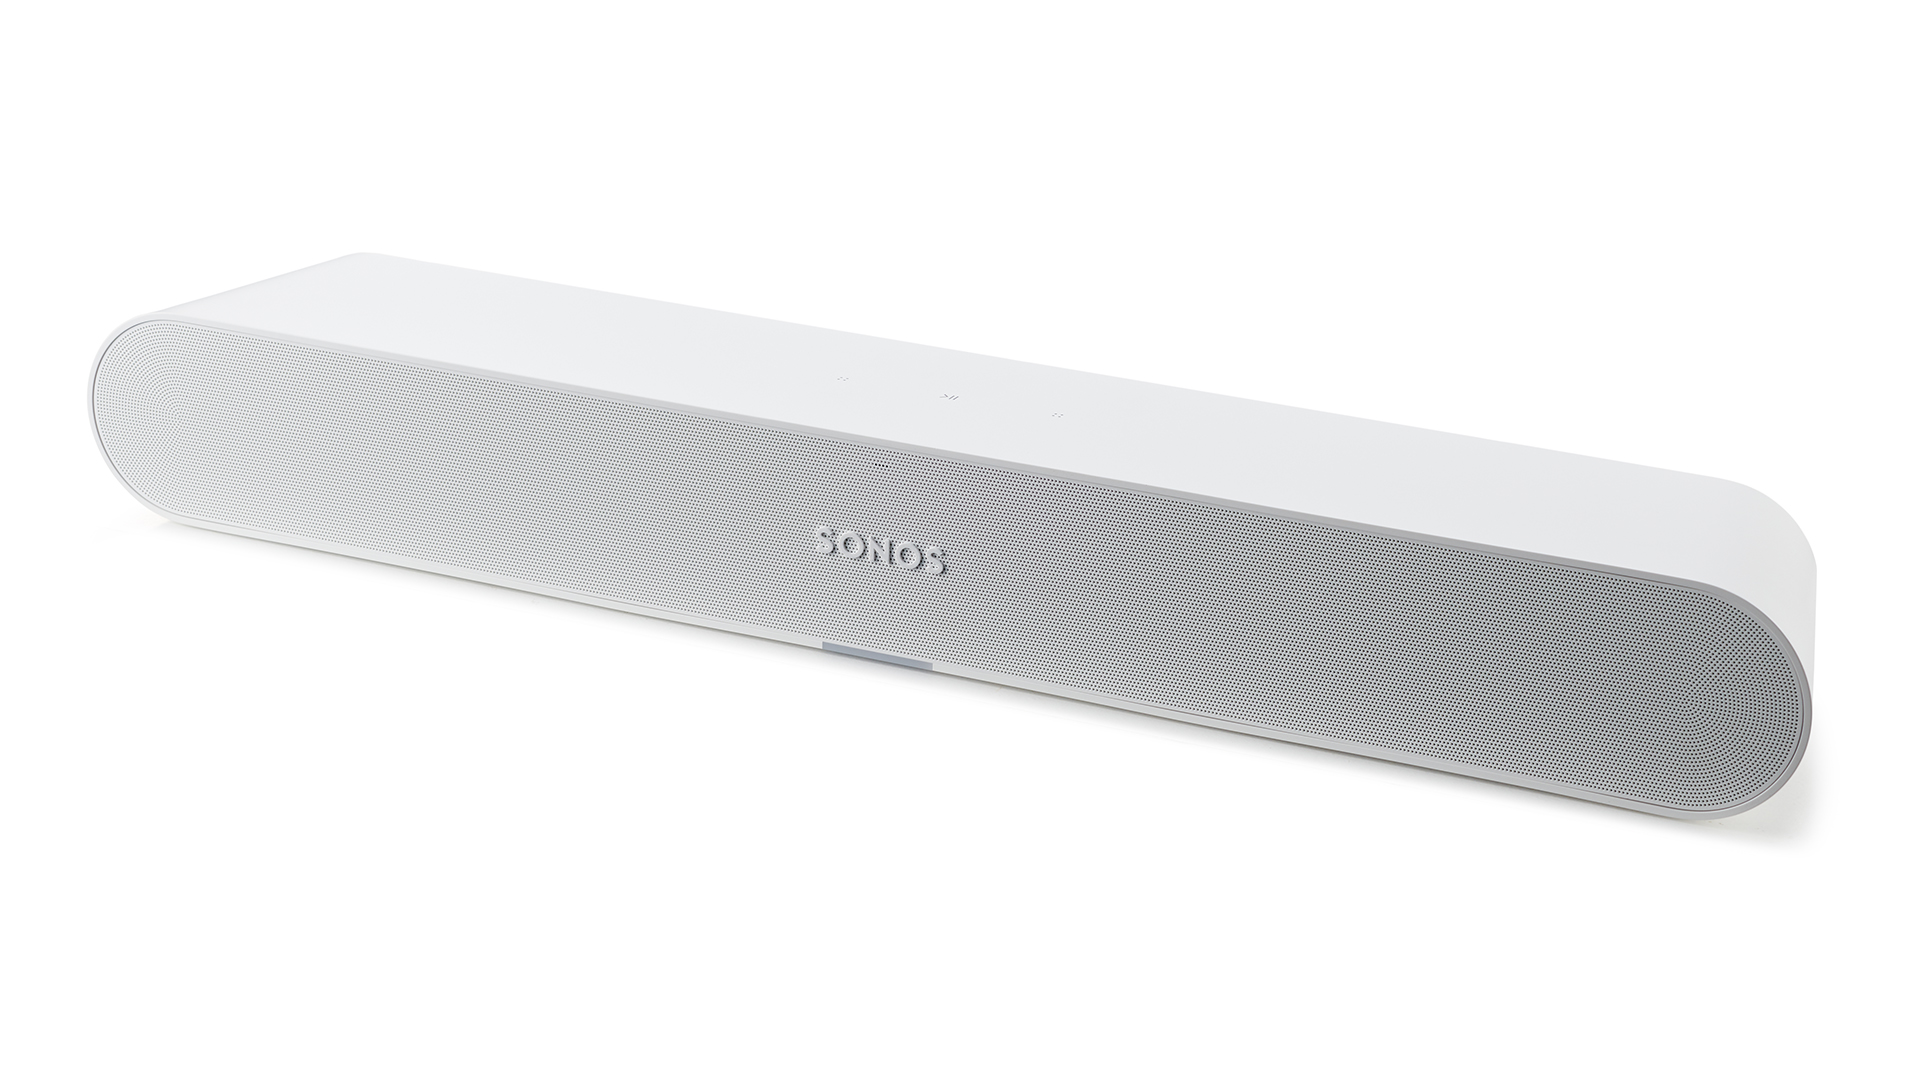 Sonos Ray review: an update has made the Ray a much better 